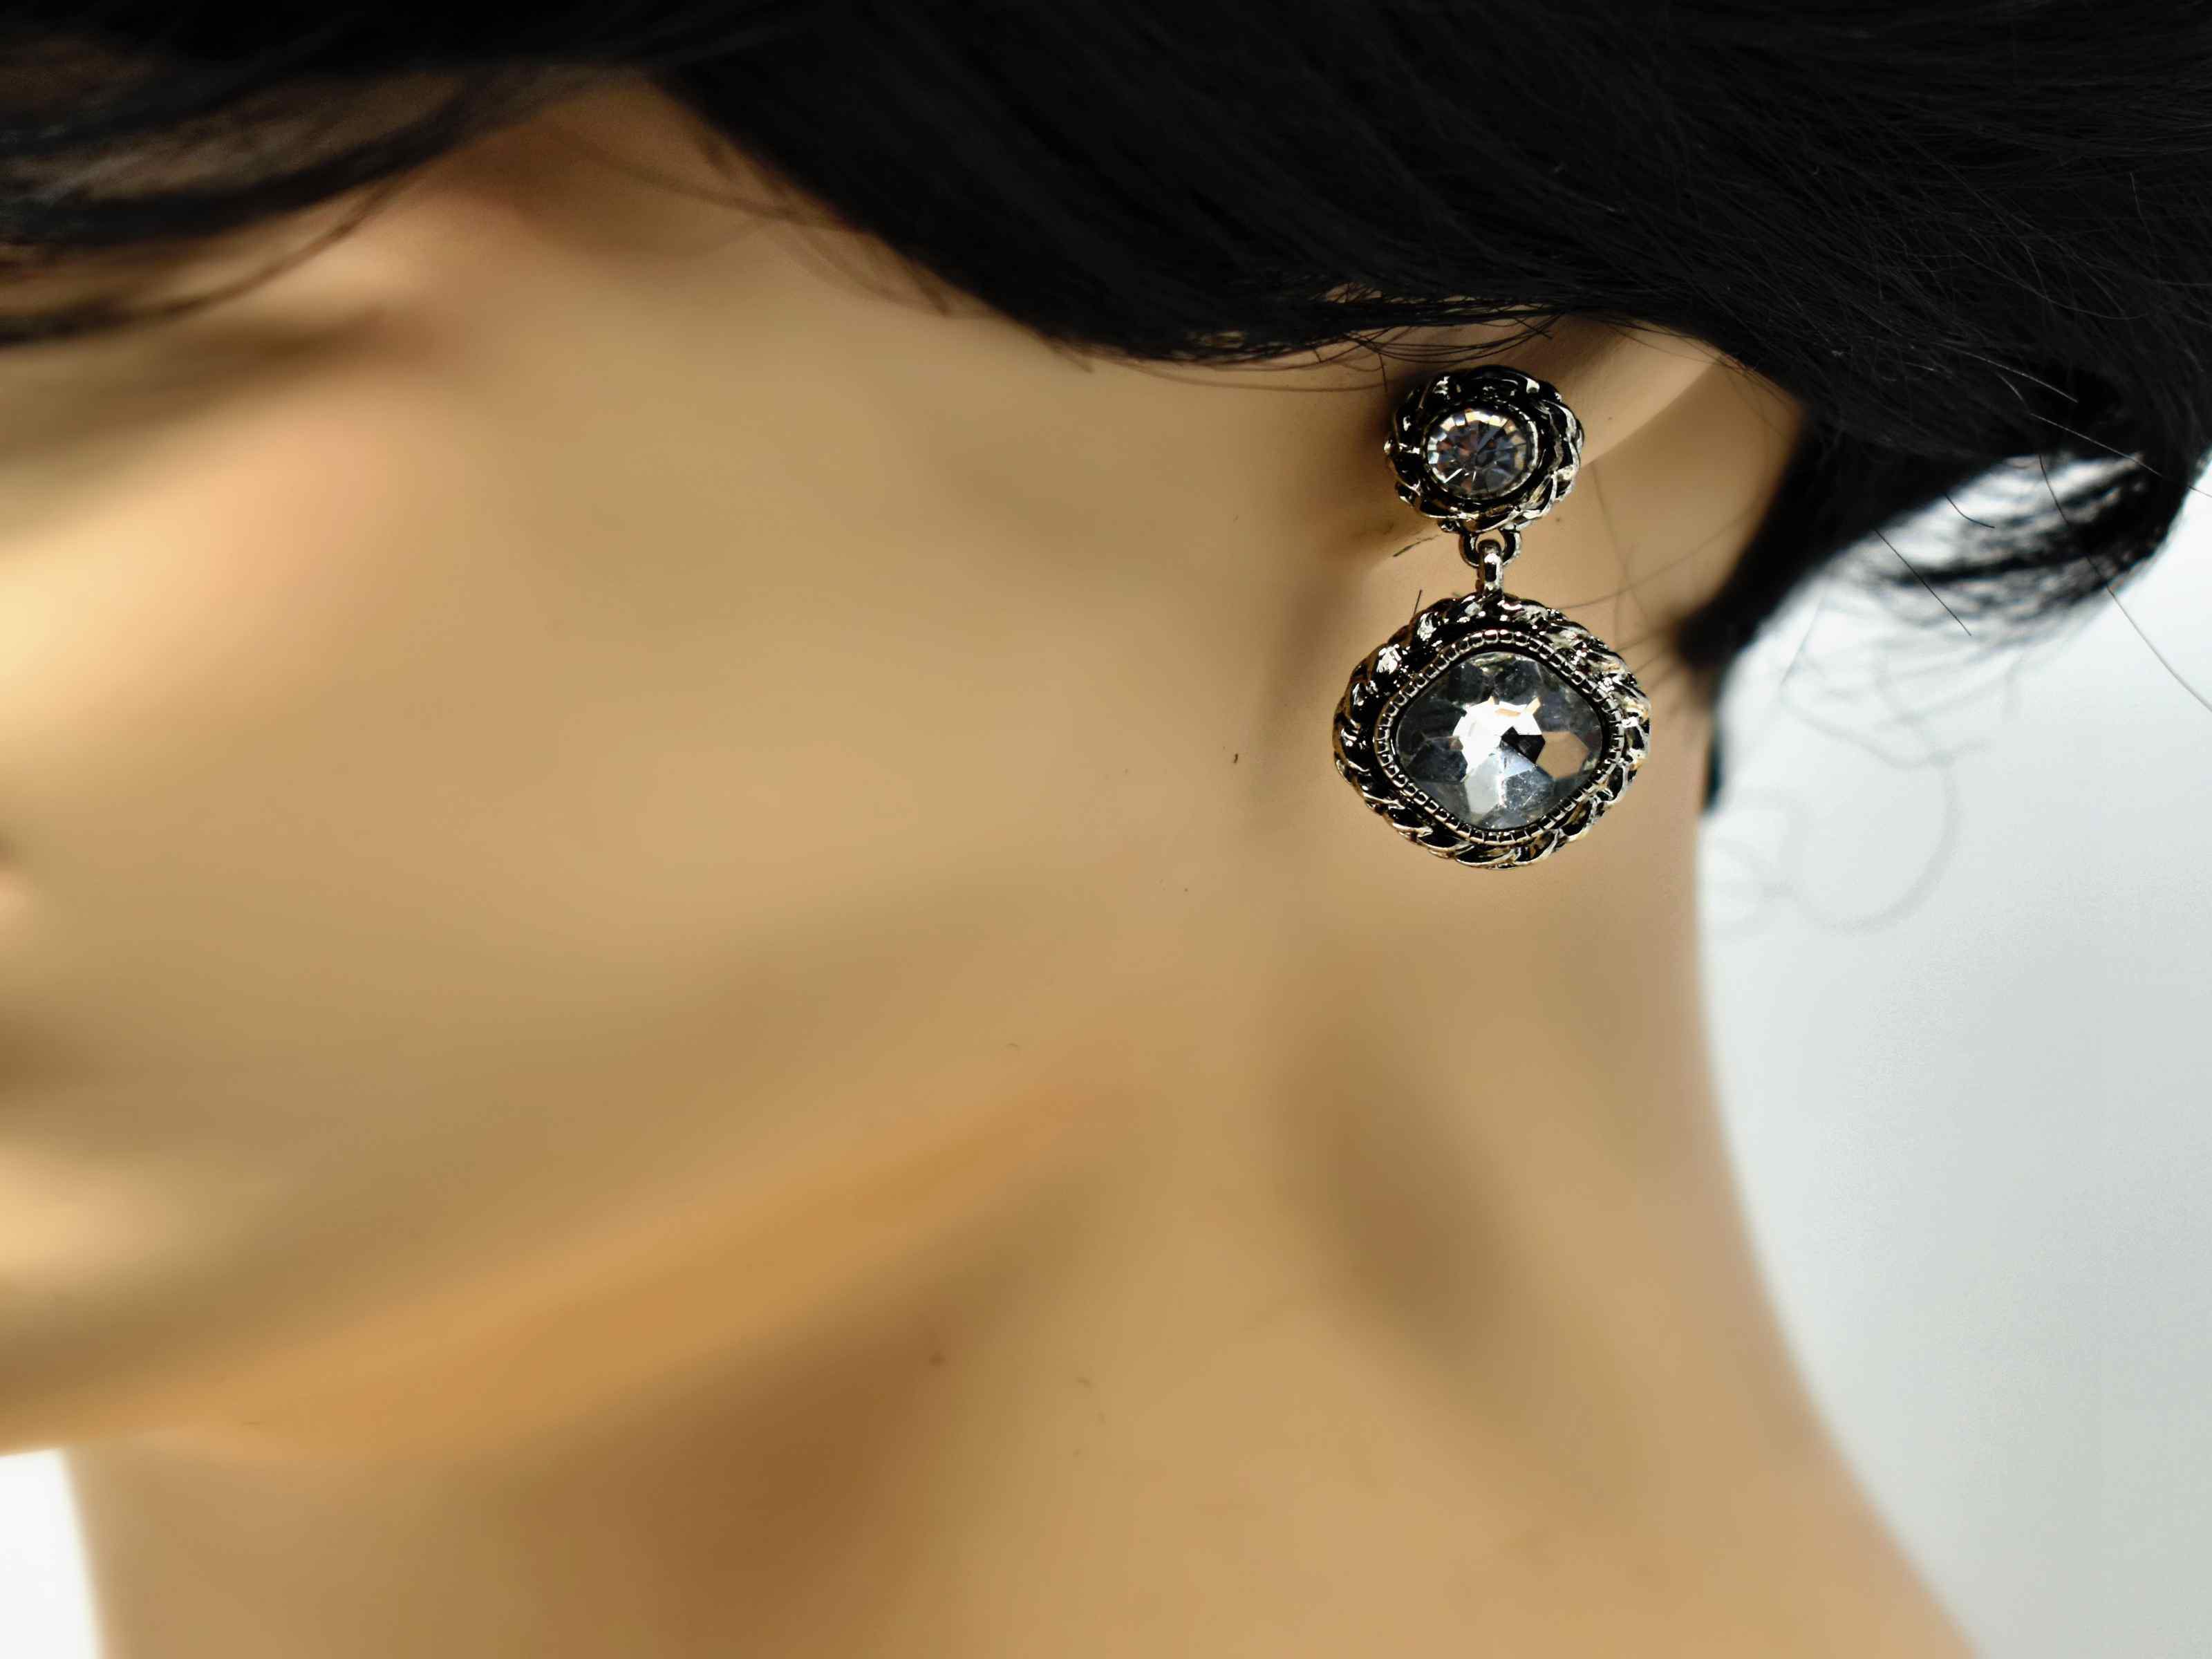 Our chic flax earrings are a sweet statement piece. These earrings are a silver chandelier knob earring with a  centered stone. They are 1 inch in length with a push back clasp.